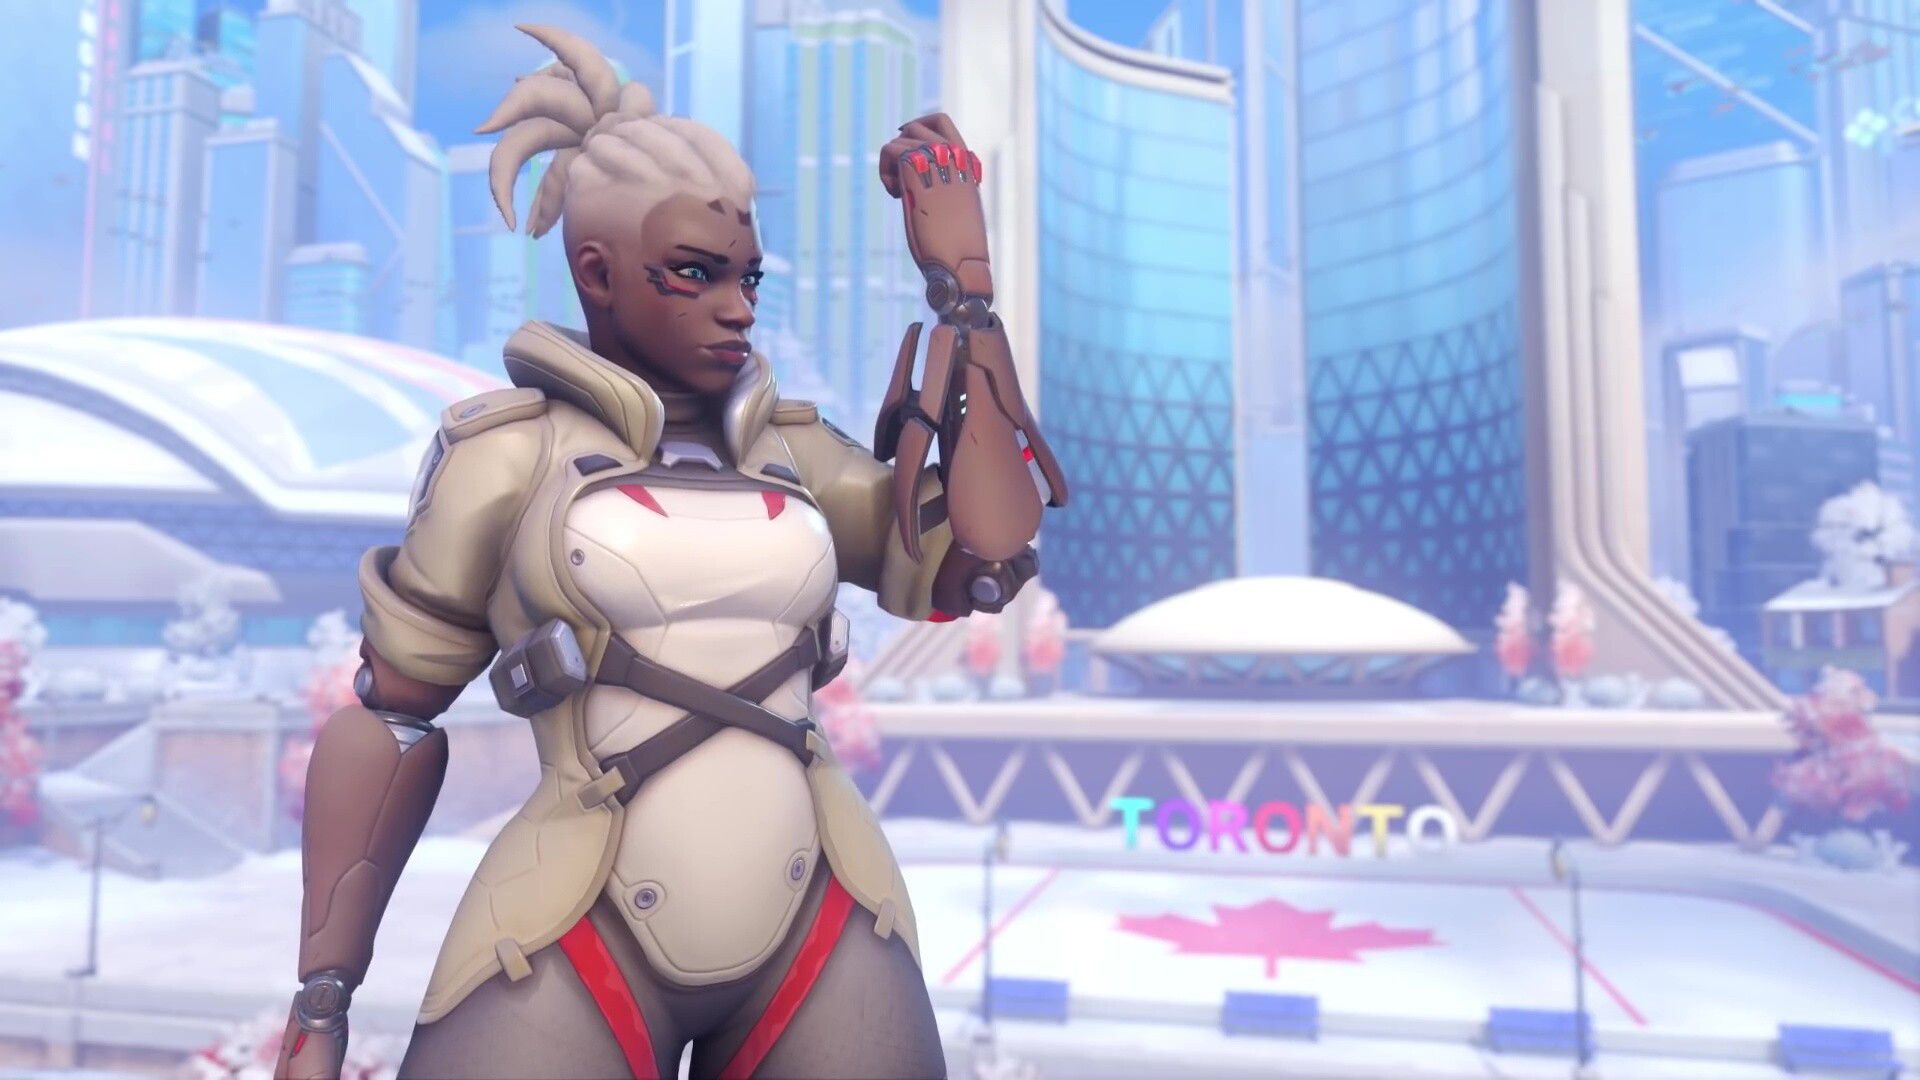 "Sojoan", a new character with a powerful rocket-equipped thigh with a whip whip of the Overwatch 2 machine 25